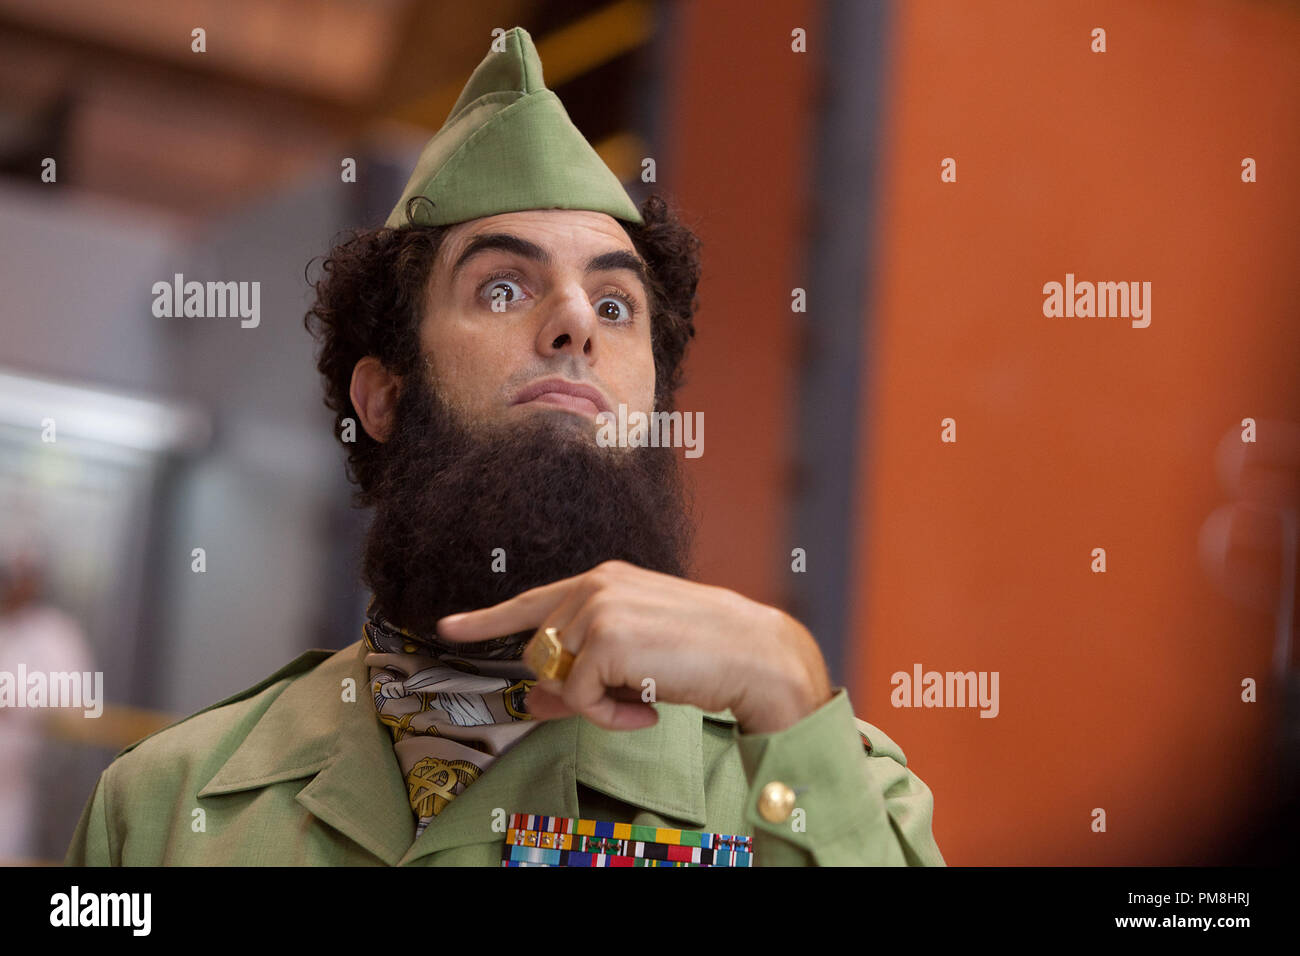 The Dictator (Sacha Baron Cohen) in THE DICTATOR, from Paramount Pictures. Stock Photo